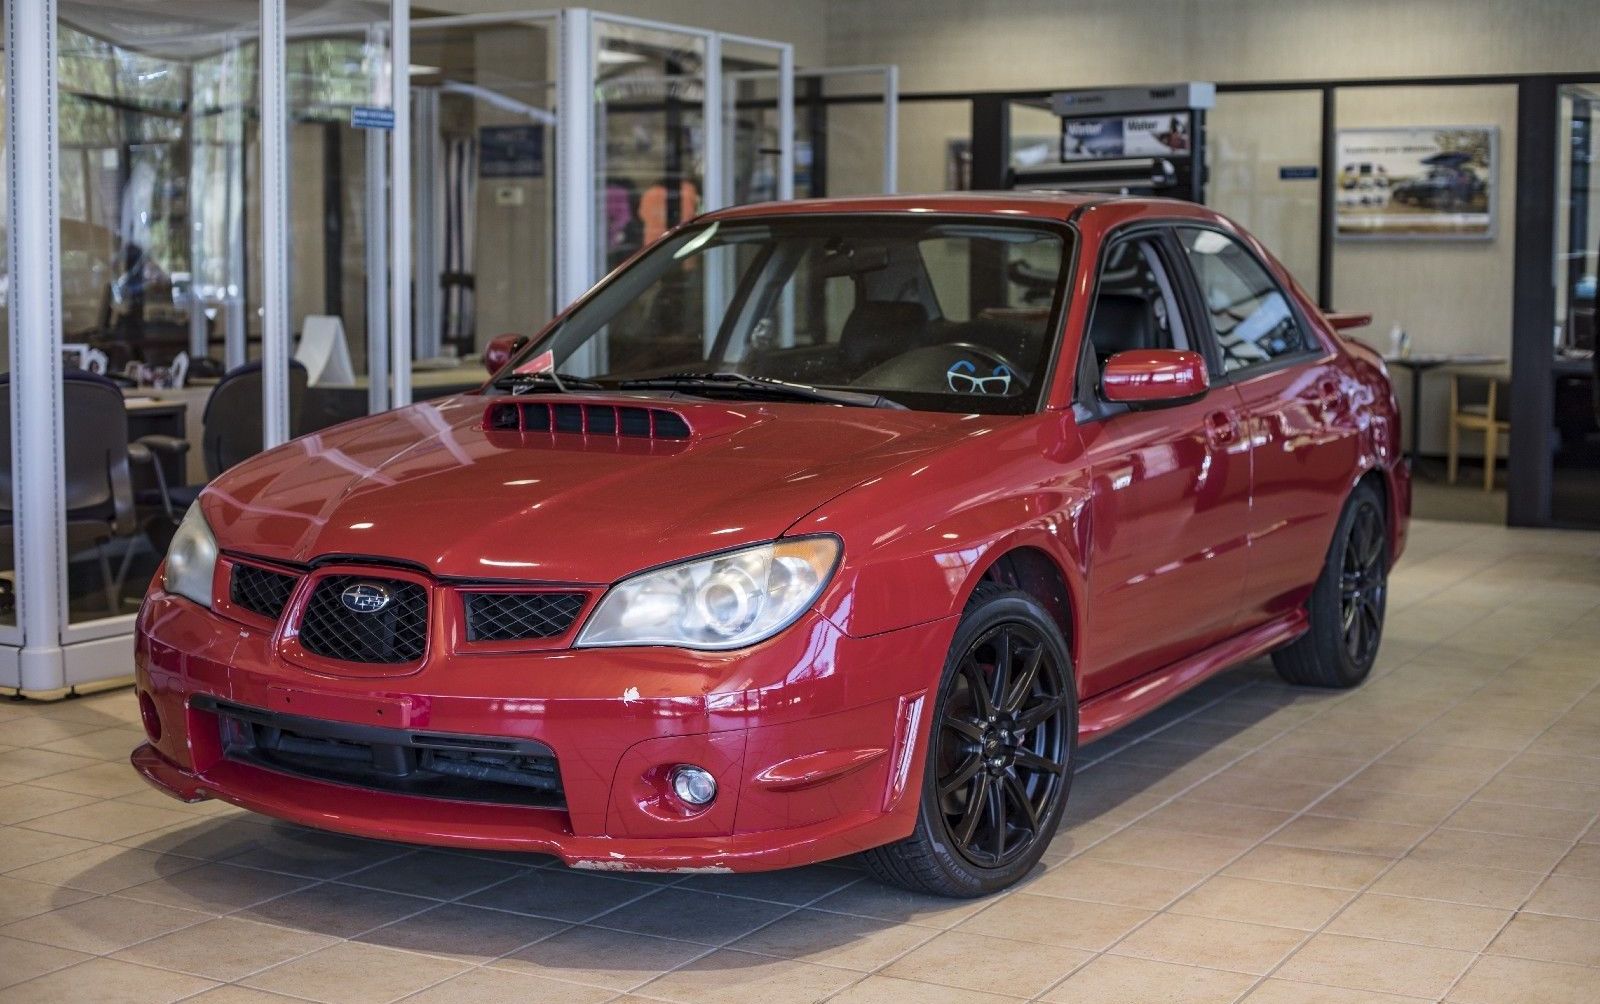 For Sale 2006 Subaru Wrx From Baby Driver Film Rwd Conversion